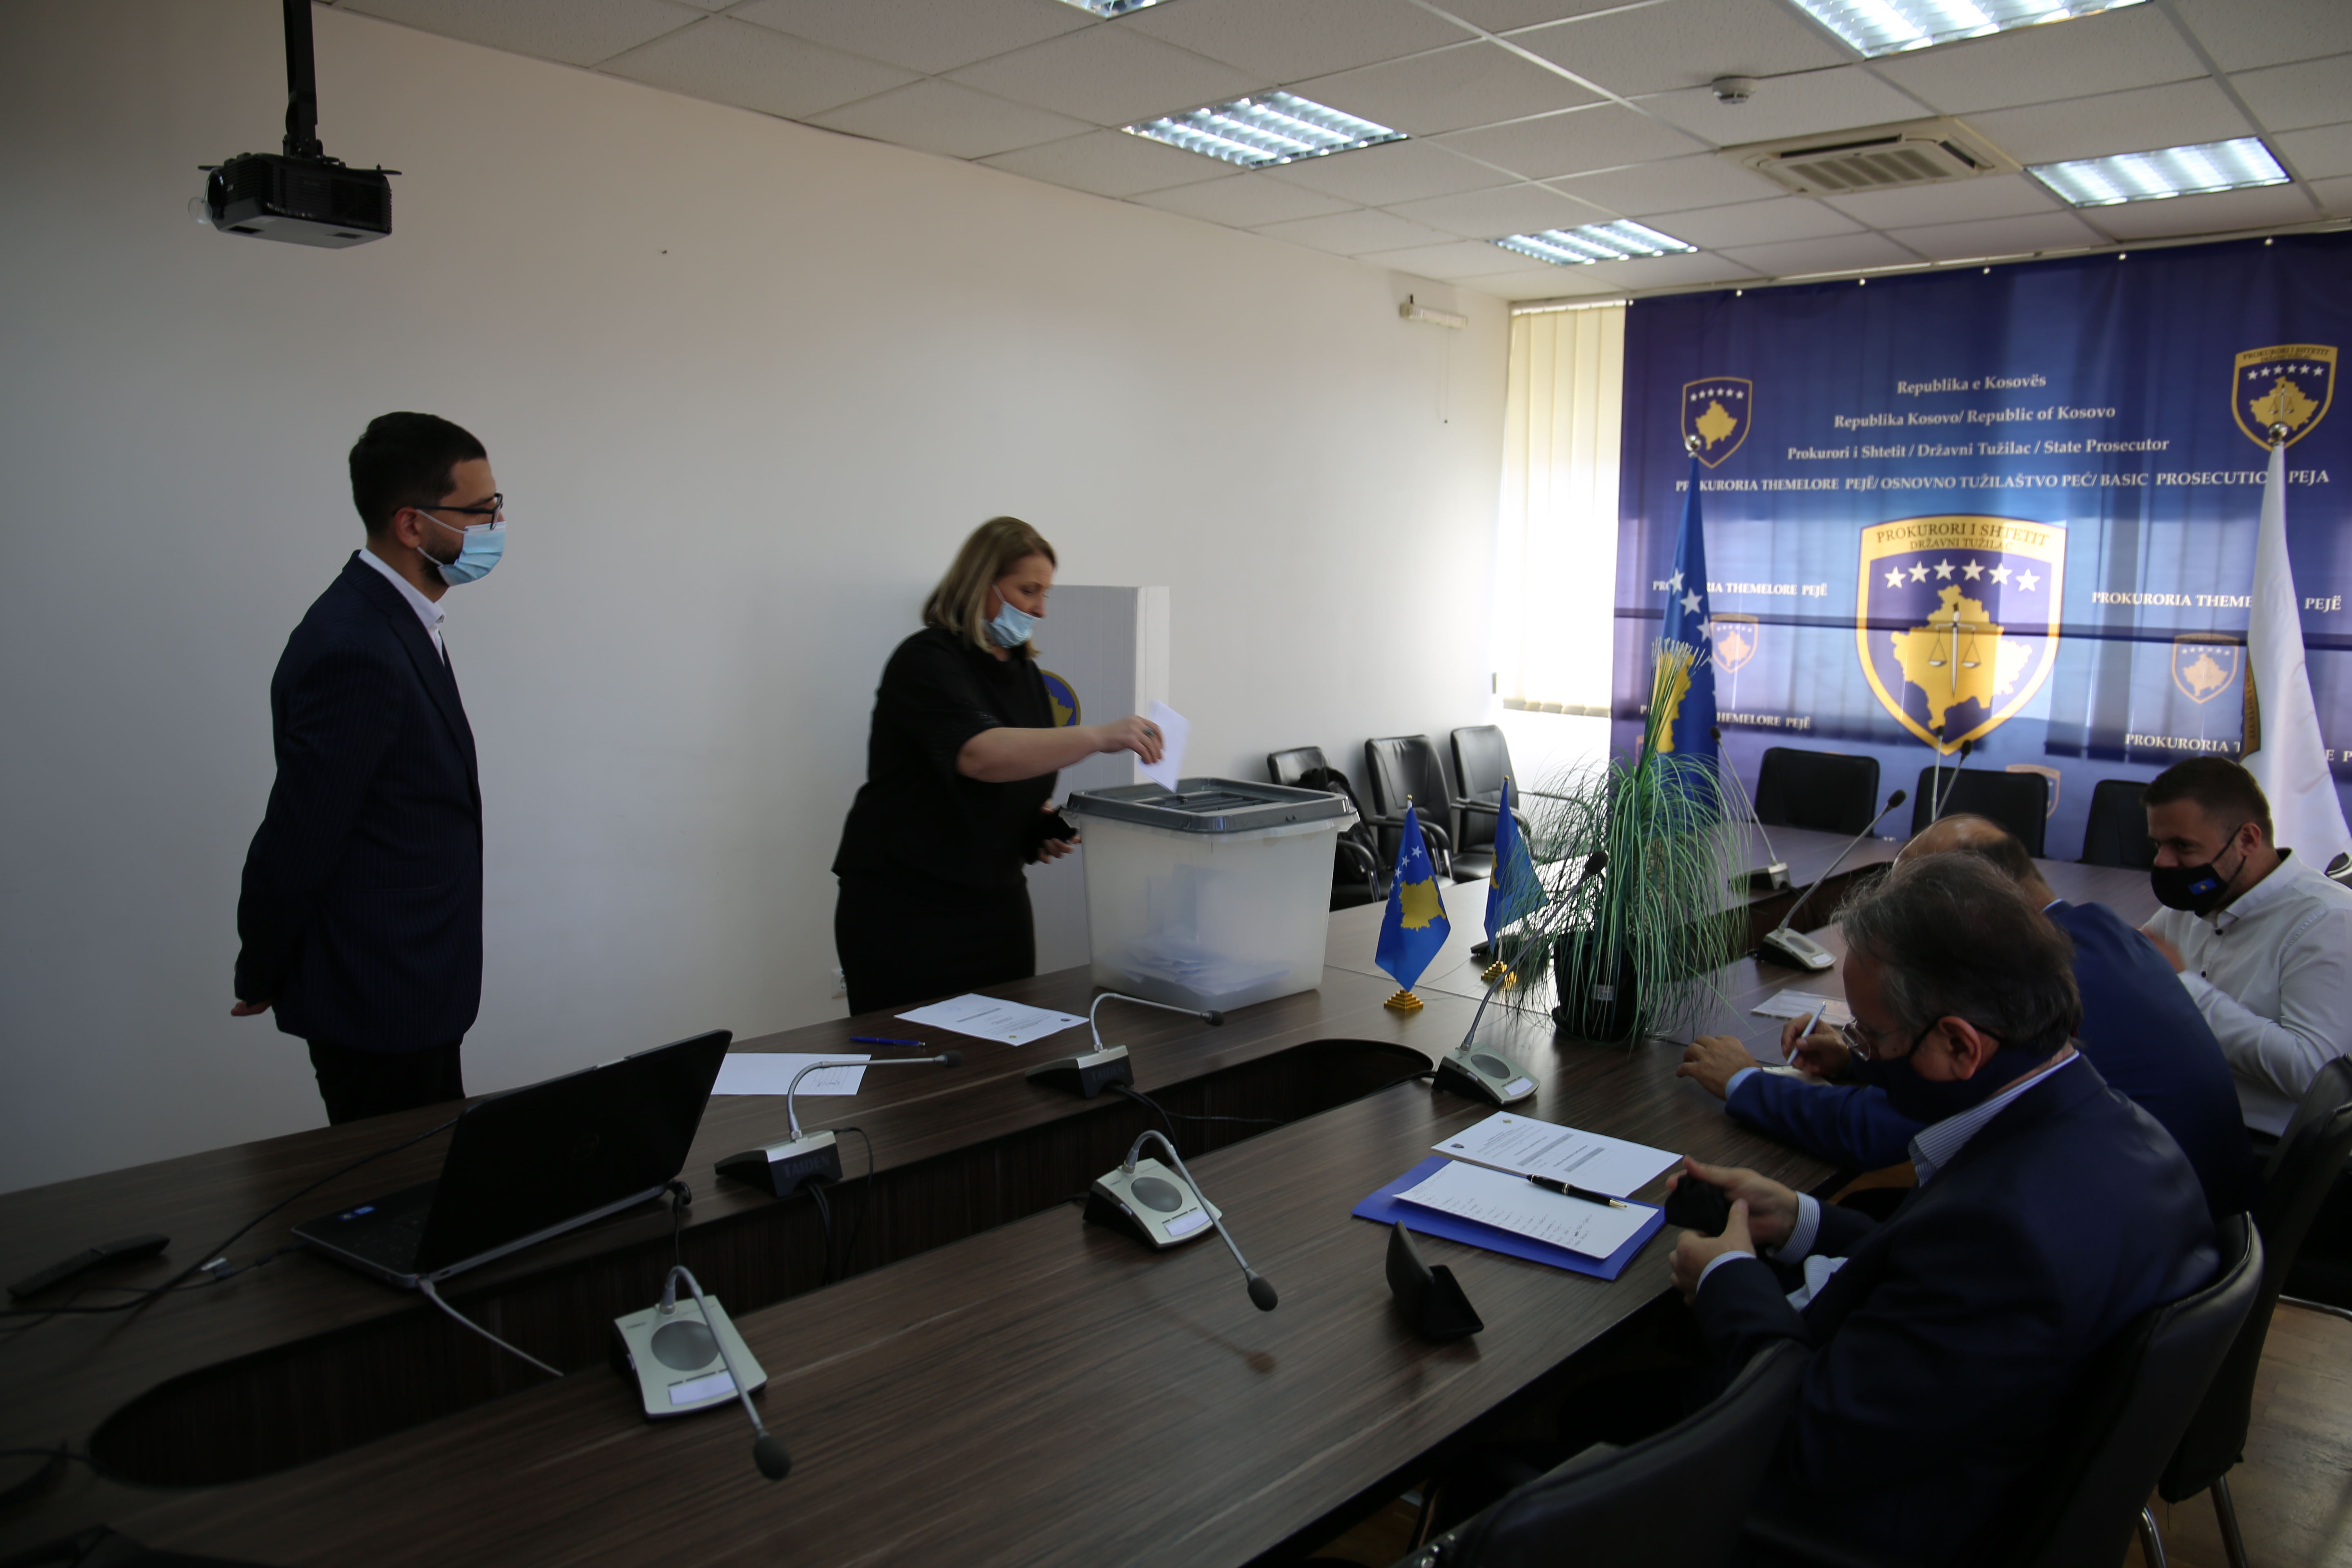 Voting process for the election of KPC members from the ranks of the Basic Prosecution of Mitrovica and Peja takes place